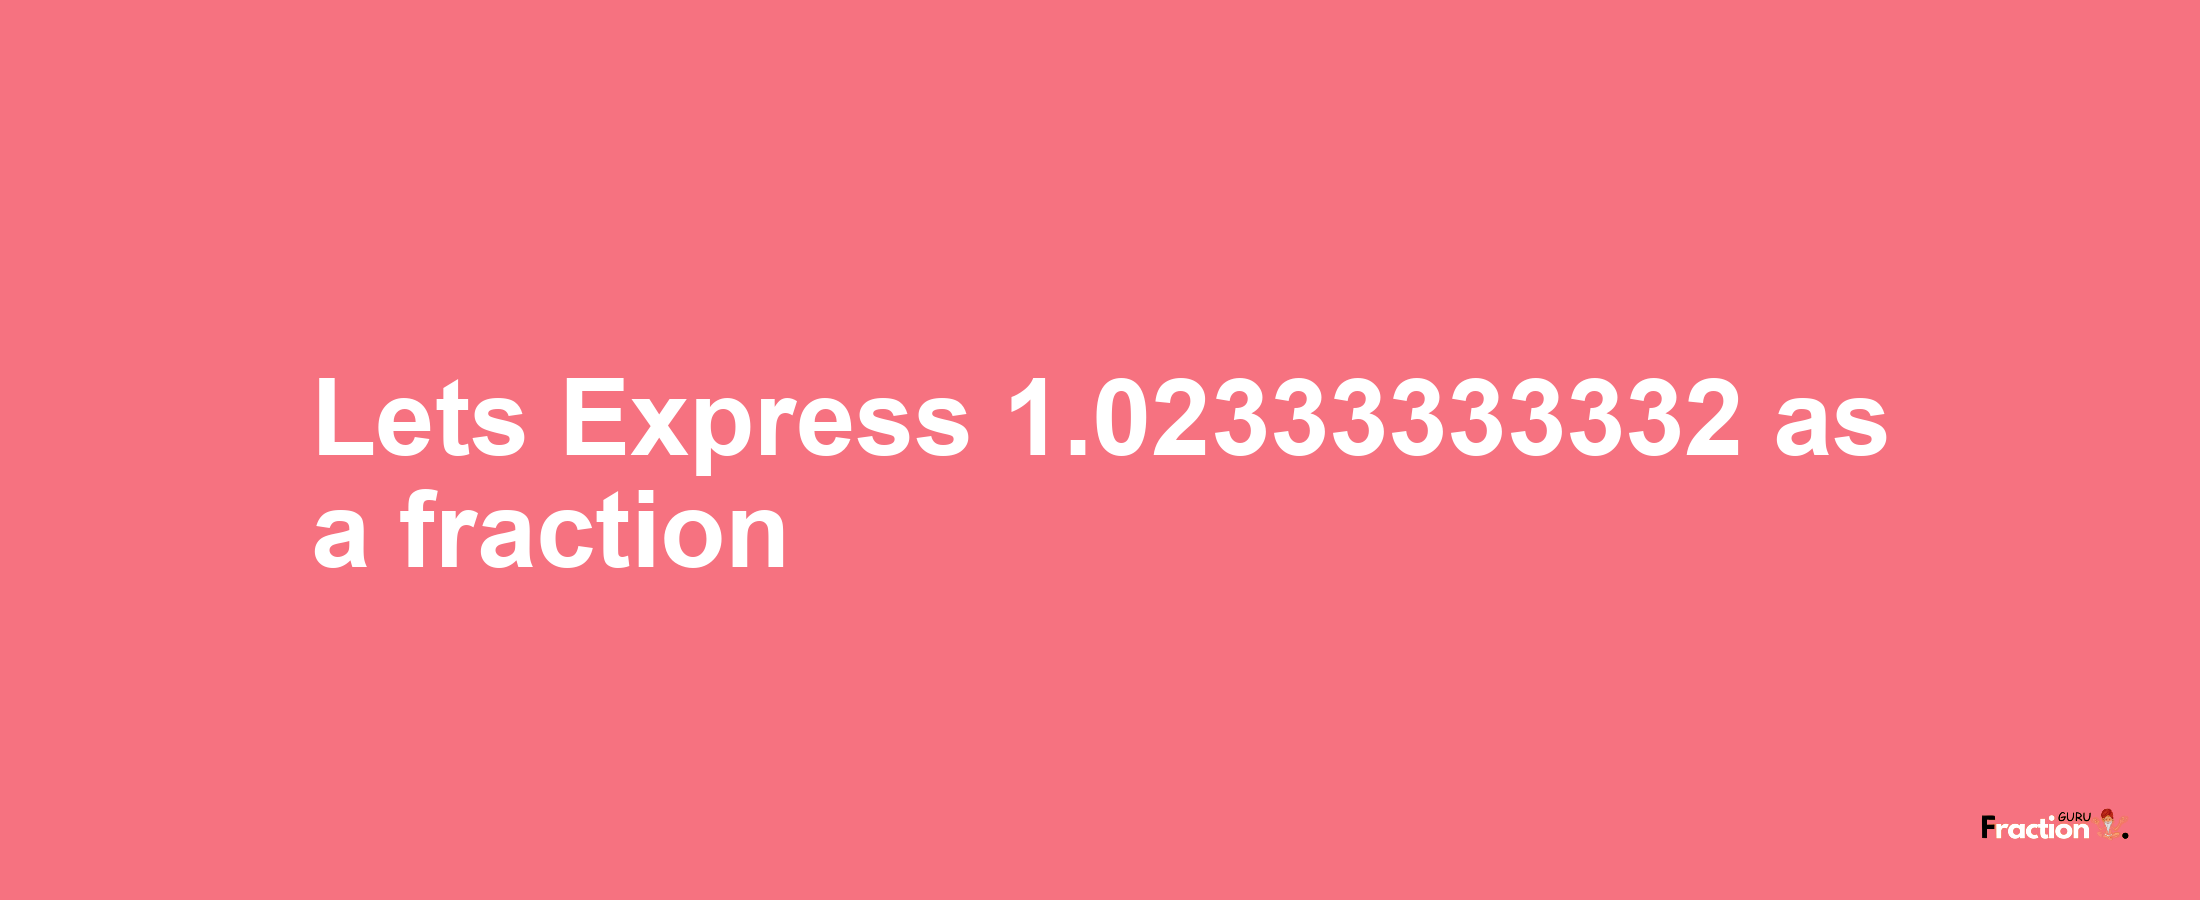 Lets Express 1.02333333332 as afraction